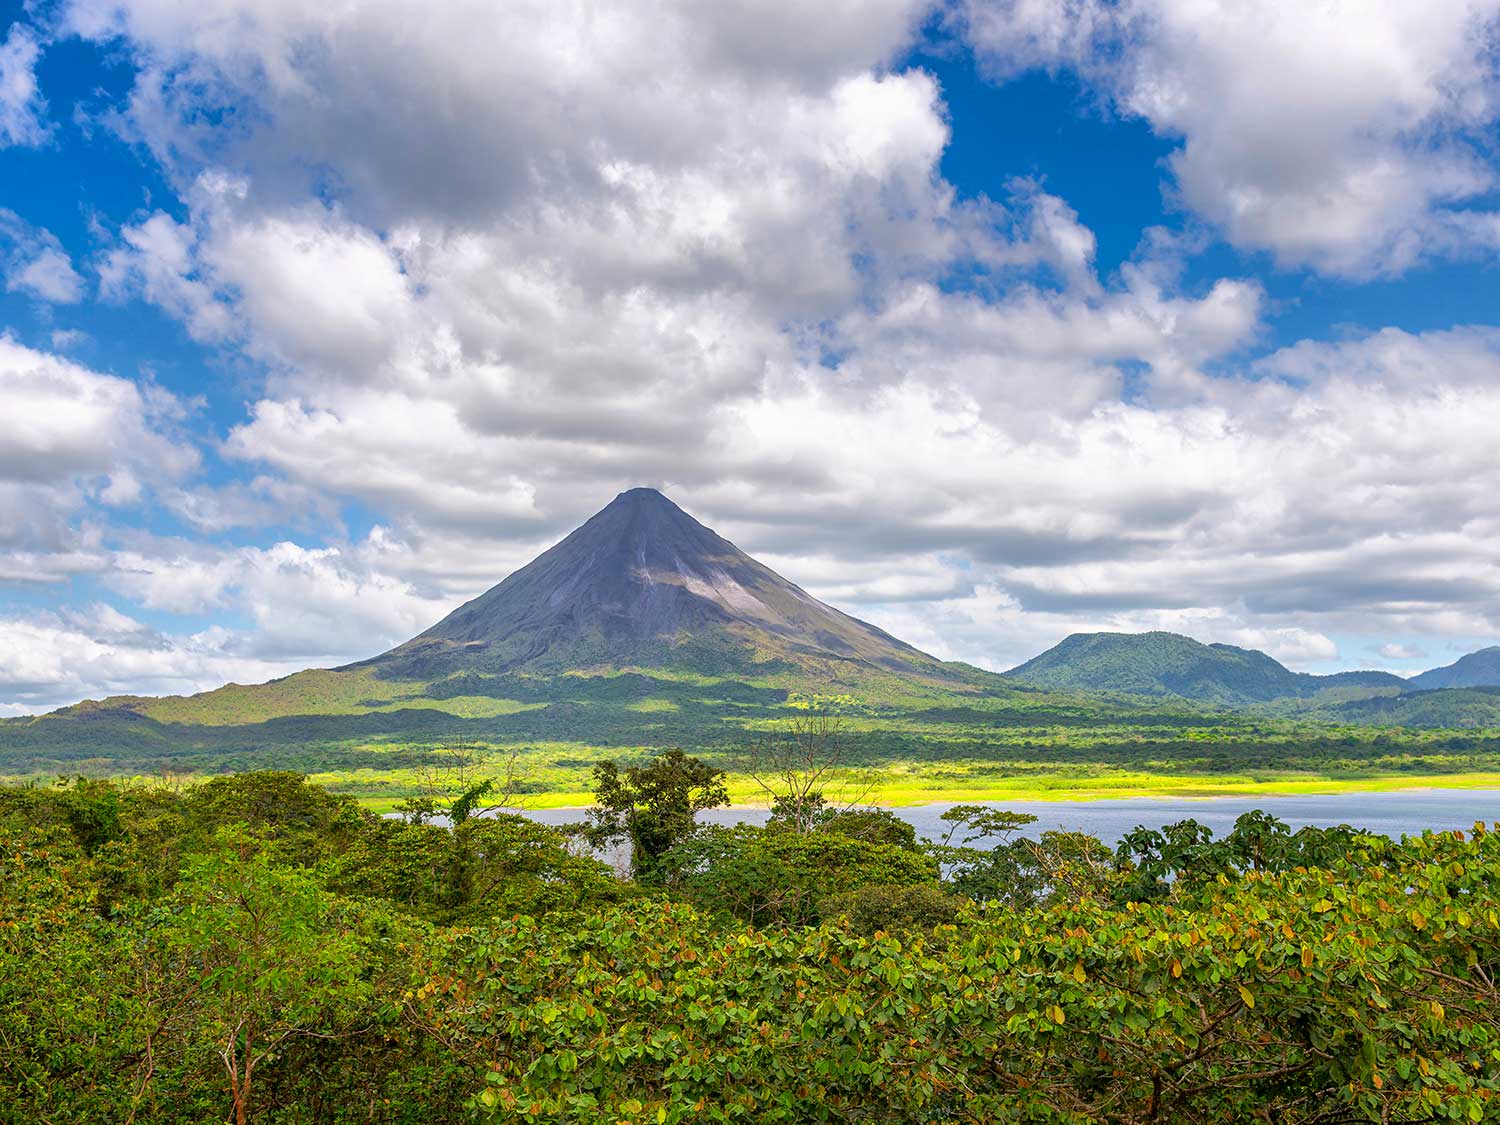 The Arenal Volcano National Park offers visitors numerous adventure opportunities